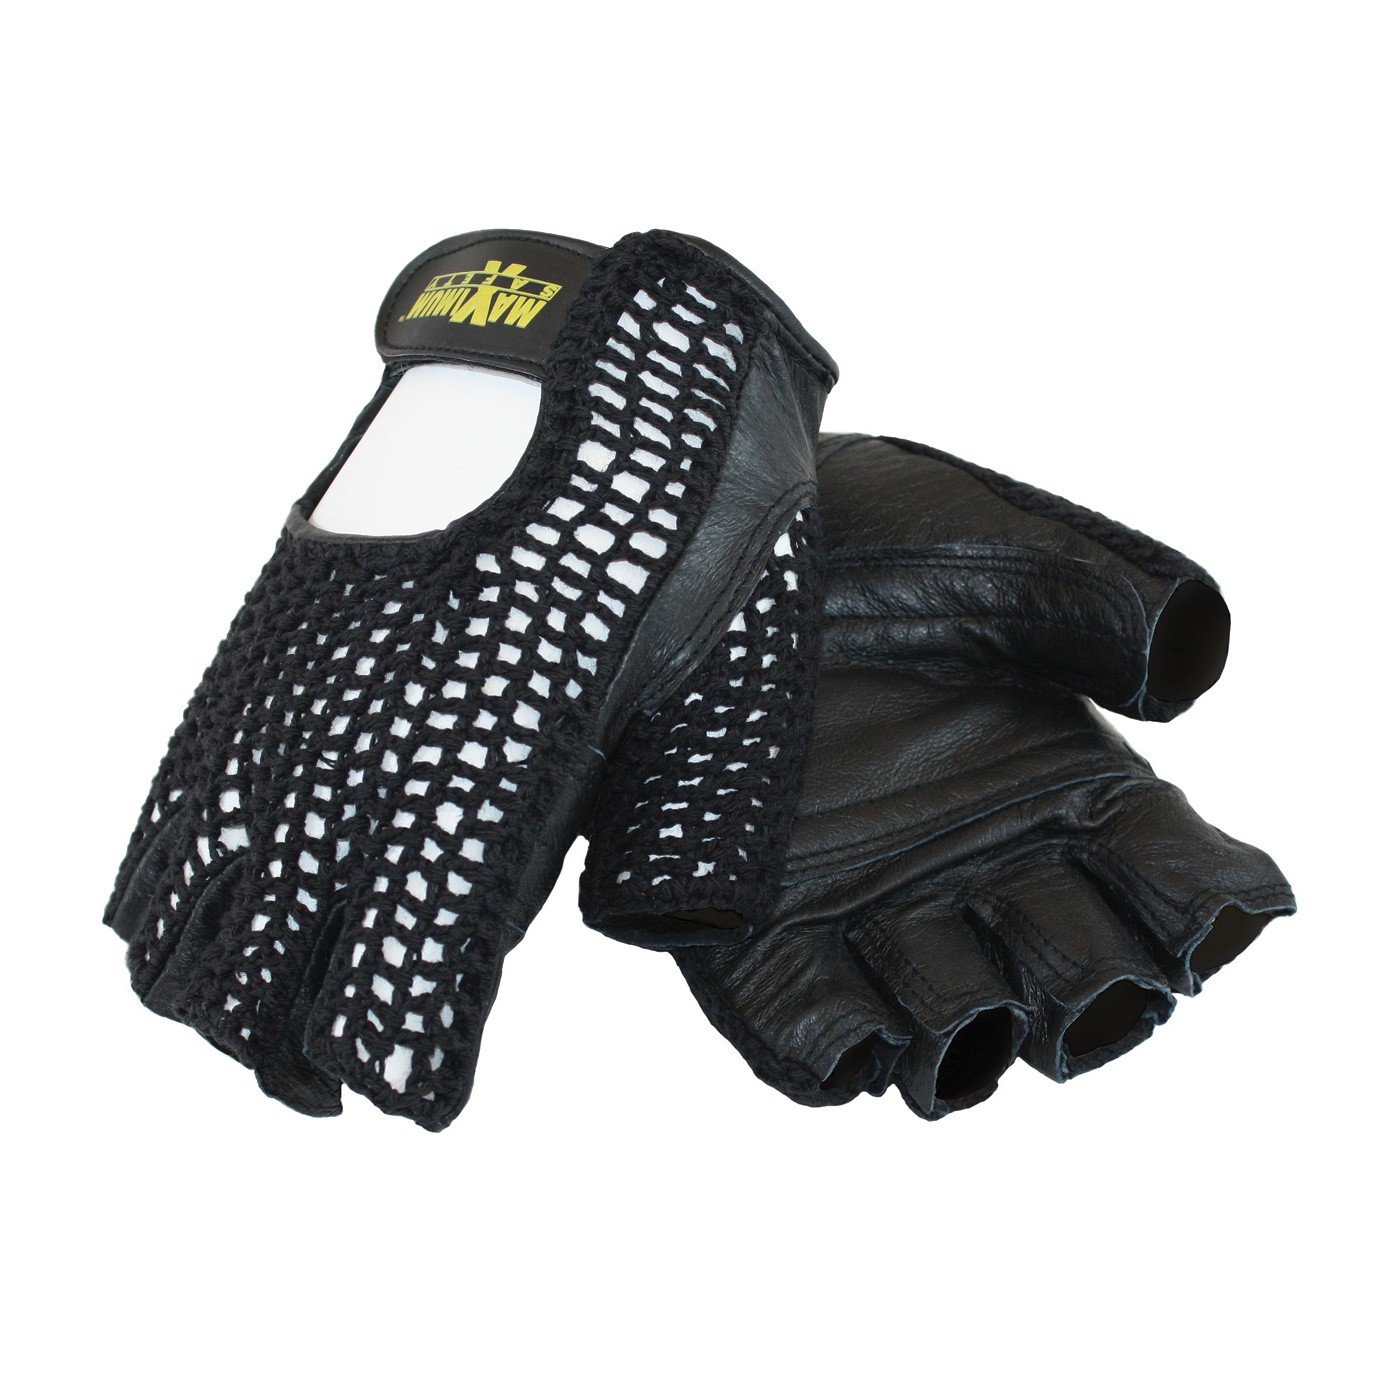 Lifting Gloves w/ Reinforced Padded Leather Palm, Crocheted Back Size Medium